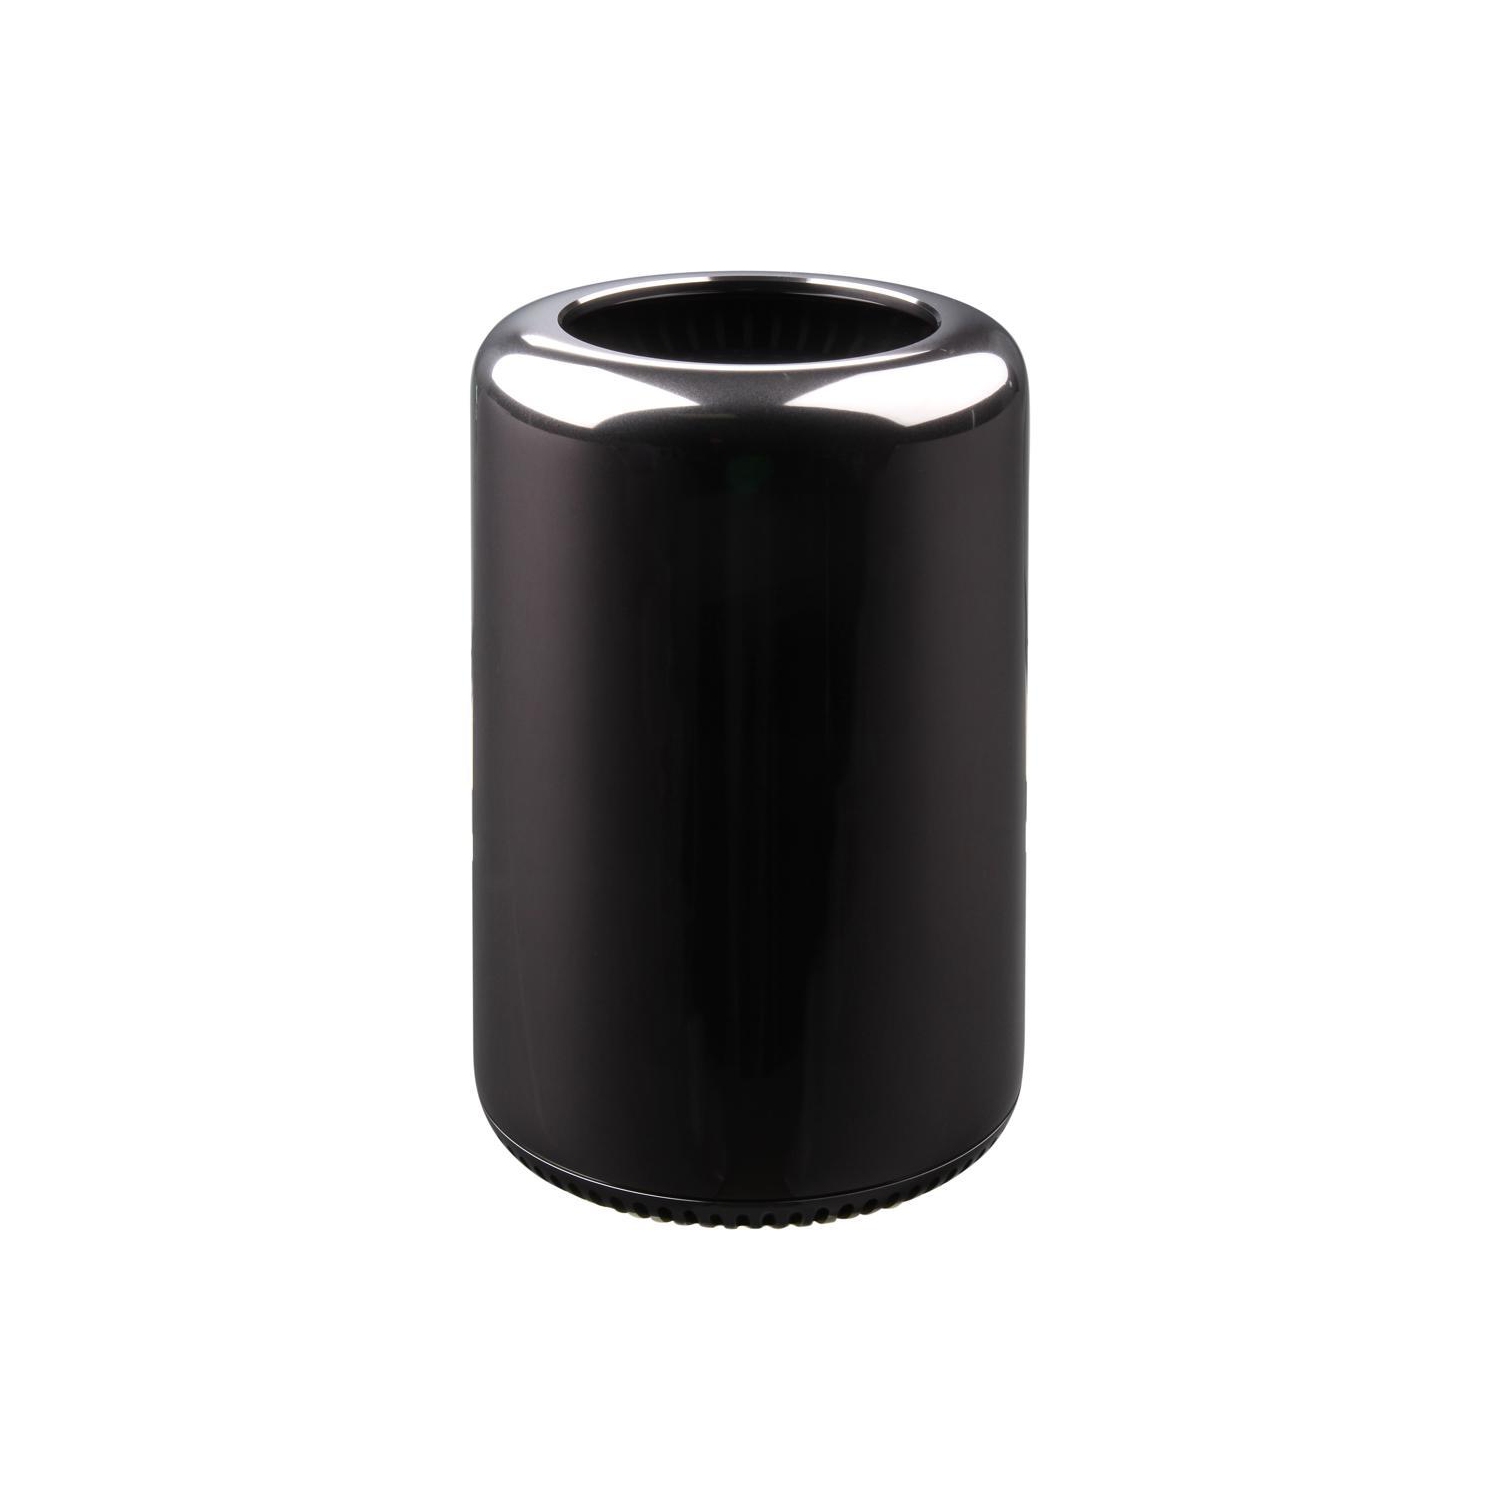 Refurbished (Excellent) - Apple Mac Pro Late 2013 CTO/MD878LL/A Desktop Computer 3.5Ghz 6-Core 16GB 512GB SSD Refurbished Grade A+ 10/10 Condition